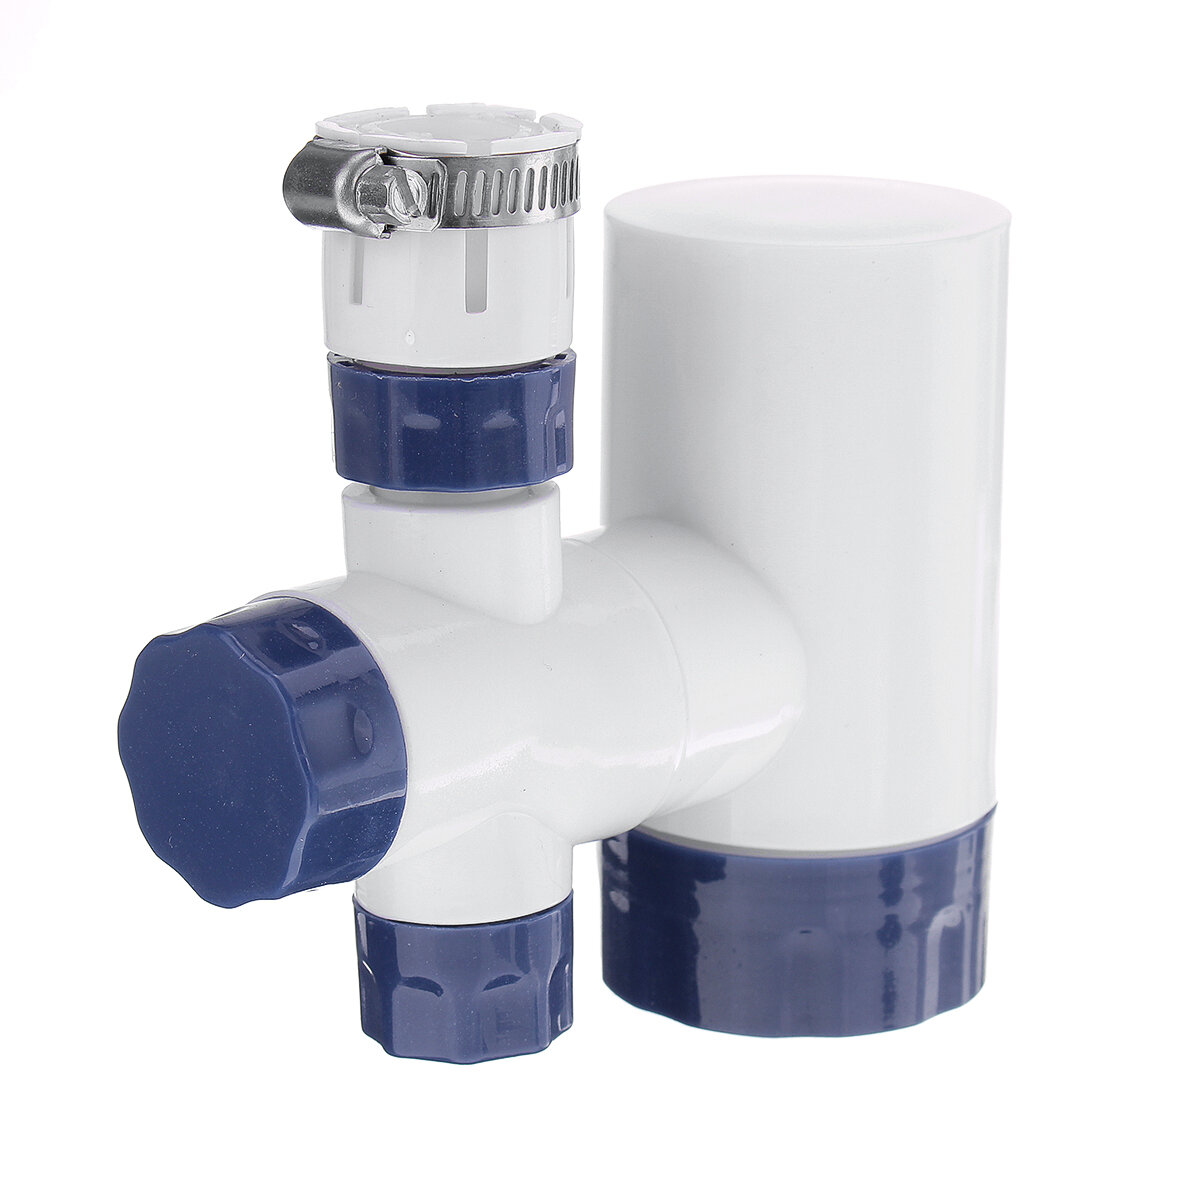 best price,7layer,faucet,water,purifier,tap,discount